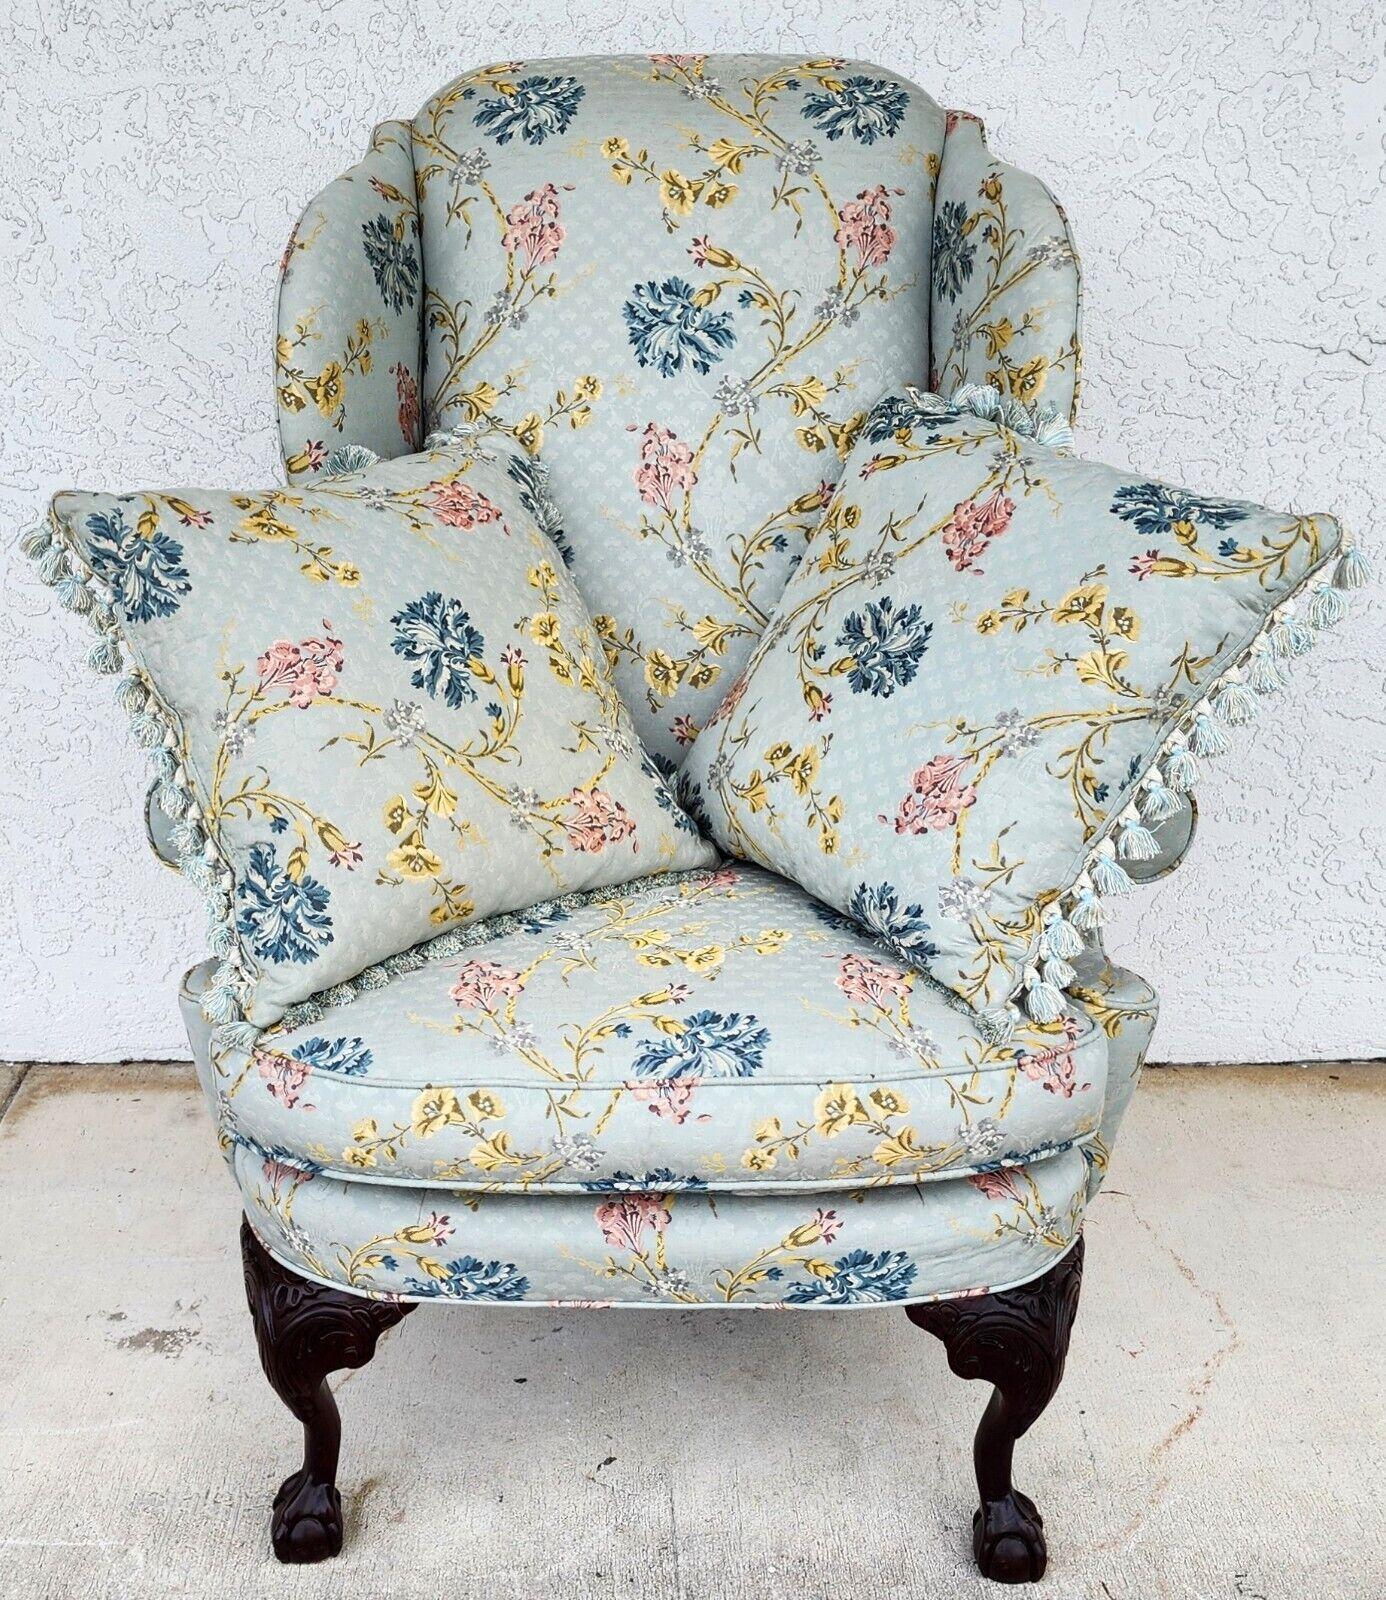 For FULL item description click on CONTINUE READING at the bottom of this page.

Offering One Of Our Recent Palm Beach Estate Fine Furniture Acquisitions Of A
Oversized Wingback Chair by CENTURY FURNITURE
Beautiful heavy cotton, floral fabric with a